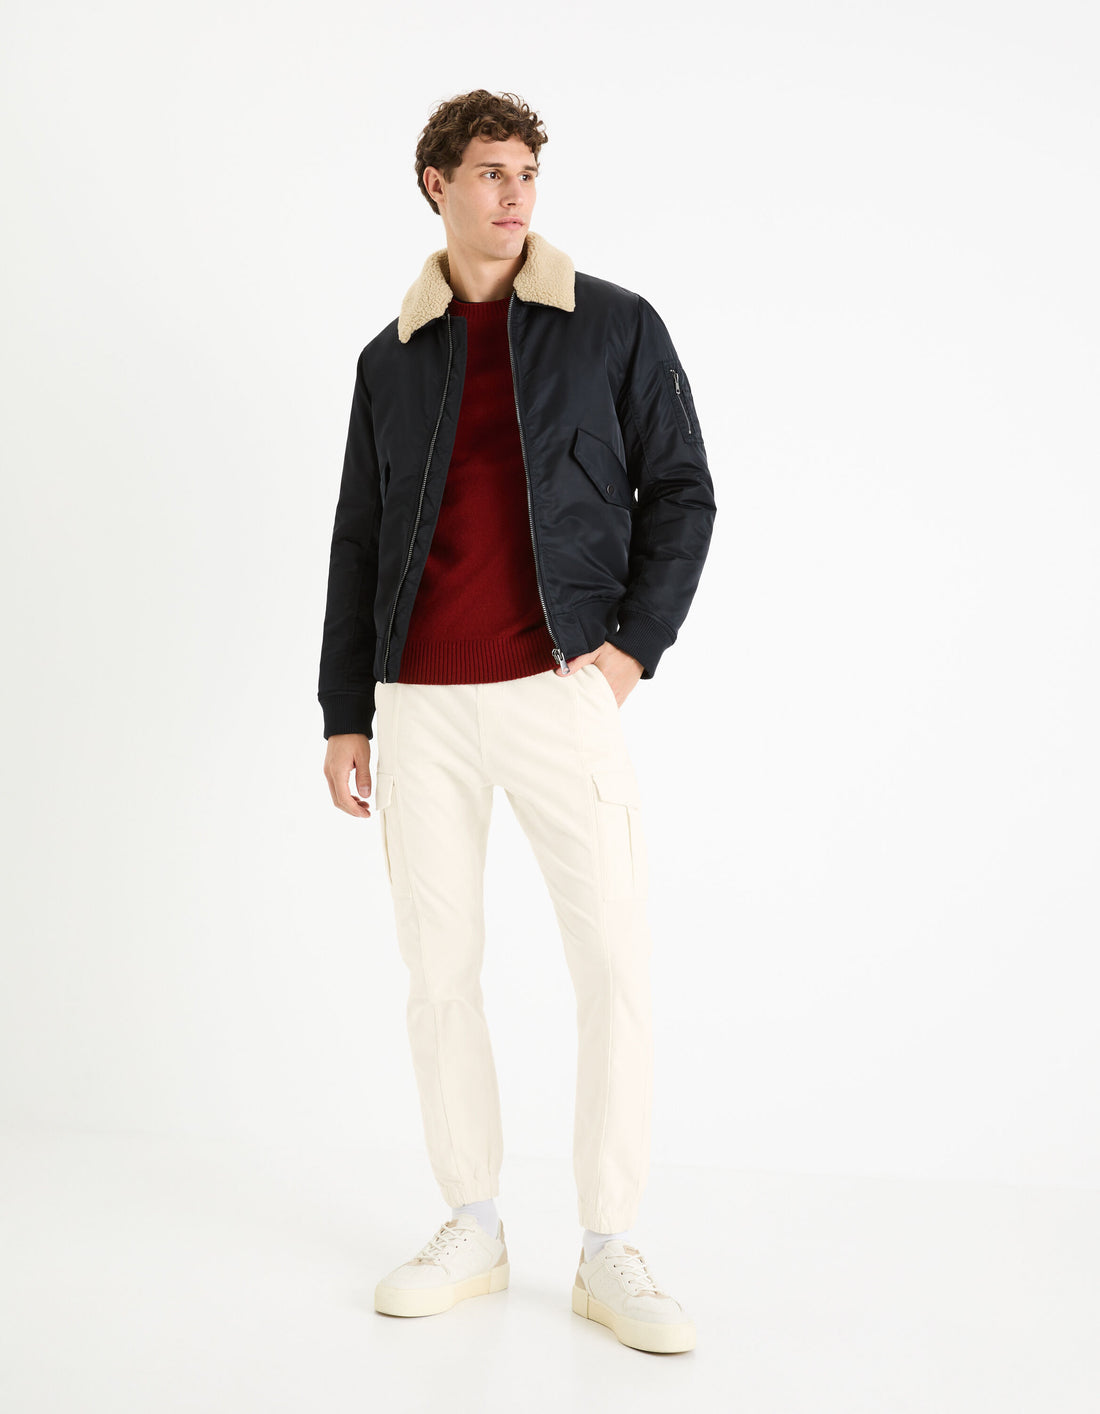 Bomber Down Jacket Lined With Sherpa_FUJAMESCOL_NAVY_02